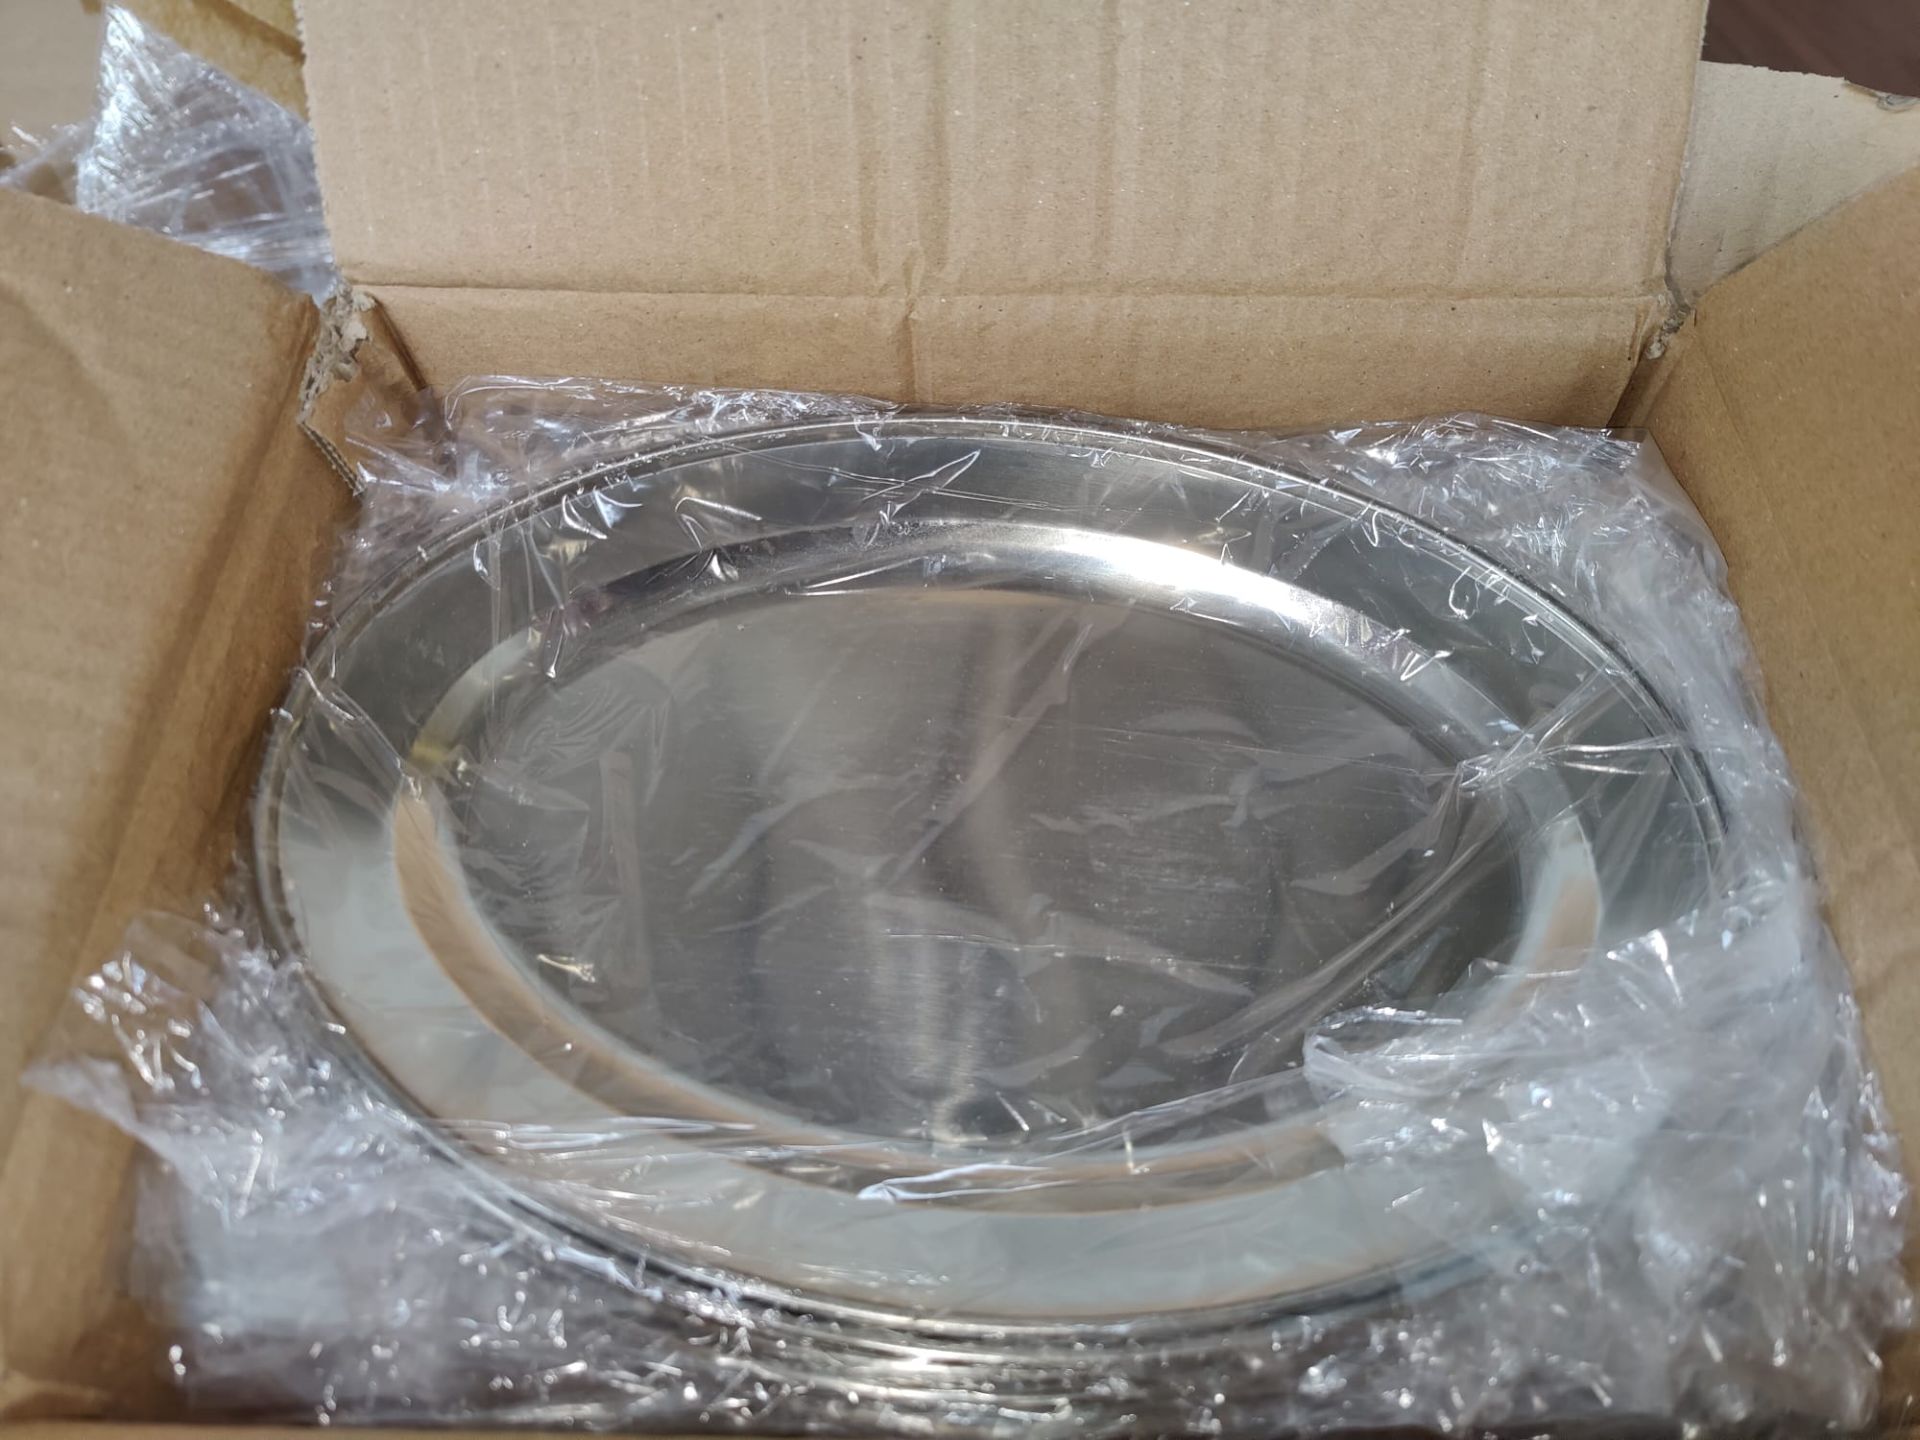 18 x Stainless Steel Small Oval Service Trays - Size: 255mm x 180mm - Brand New Boxed Stock RRP £90 - Image 4 of 8